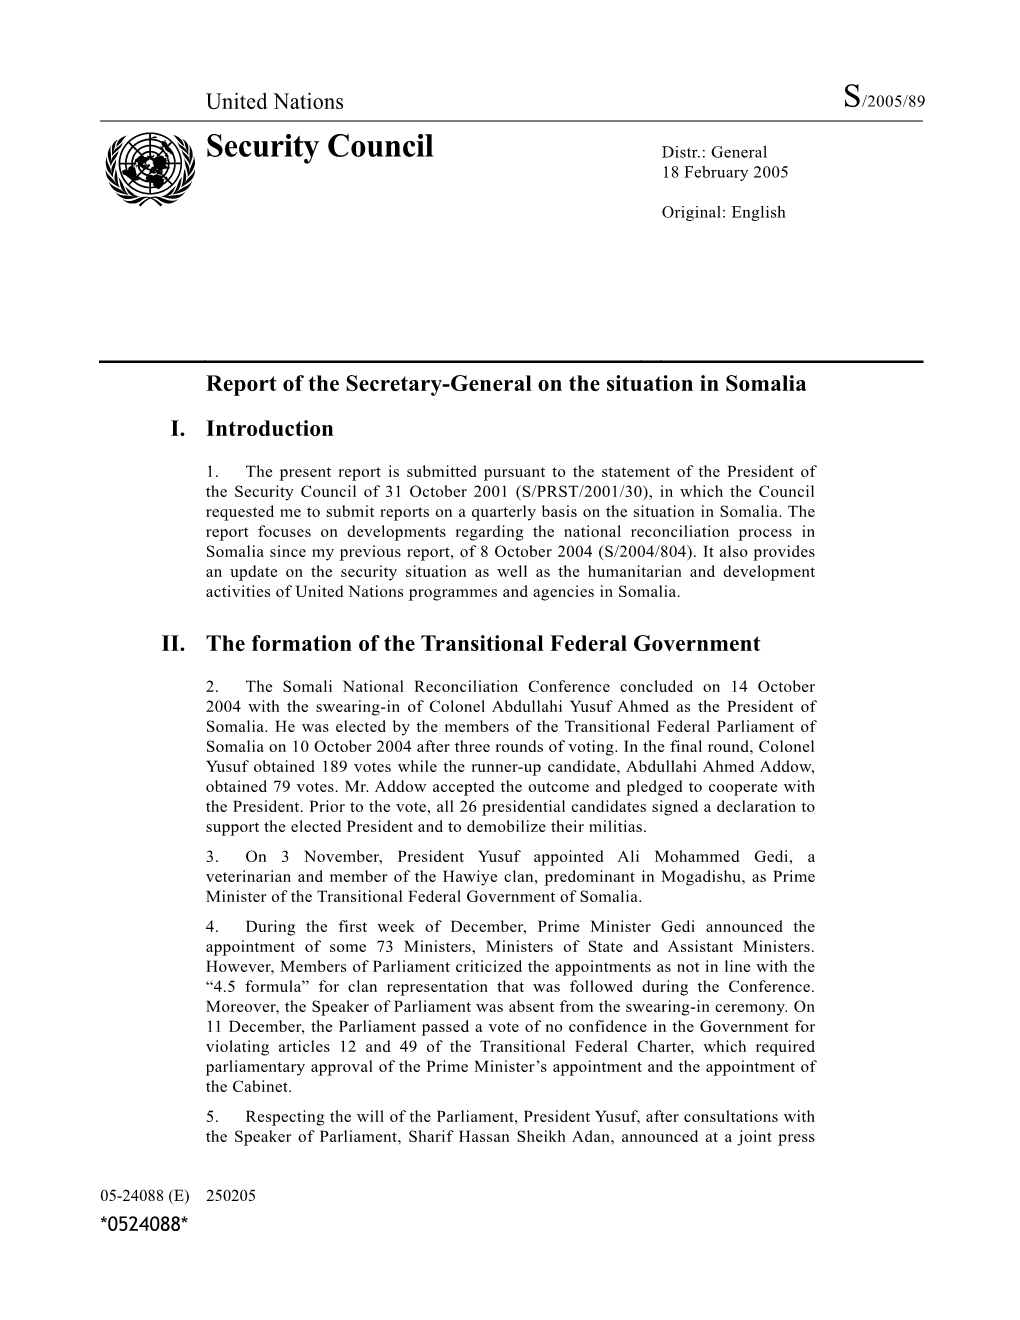 Security Council Distr.: General 18 February 2005